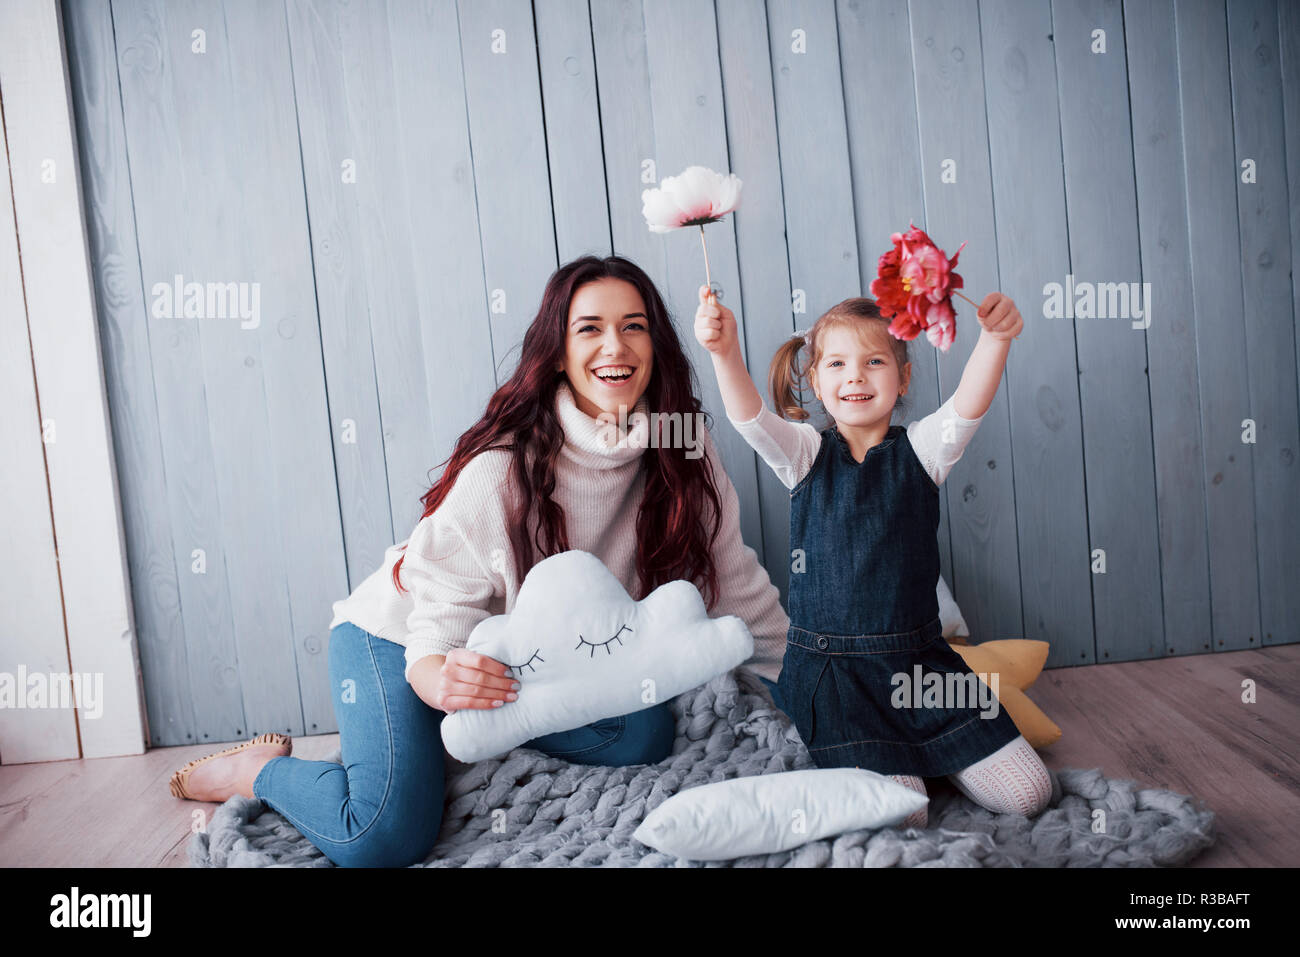 Happy loving family. Mother and her daughter child girl playing together Stock Photo